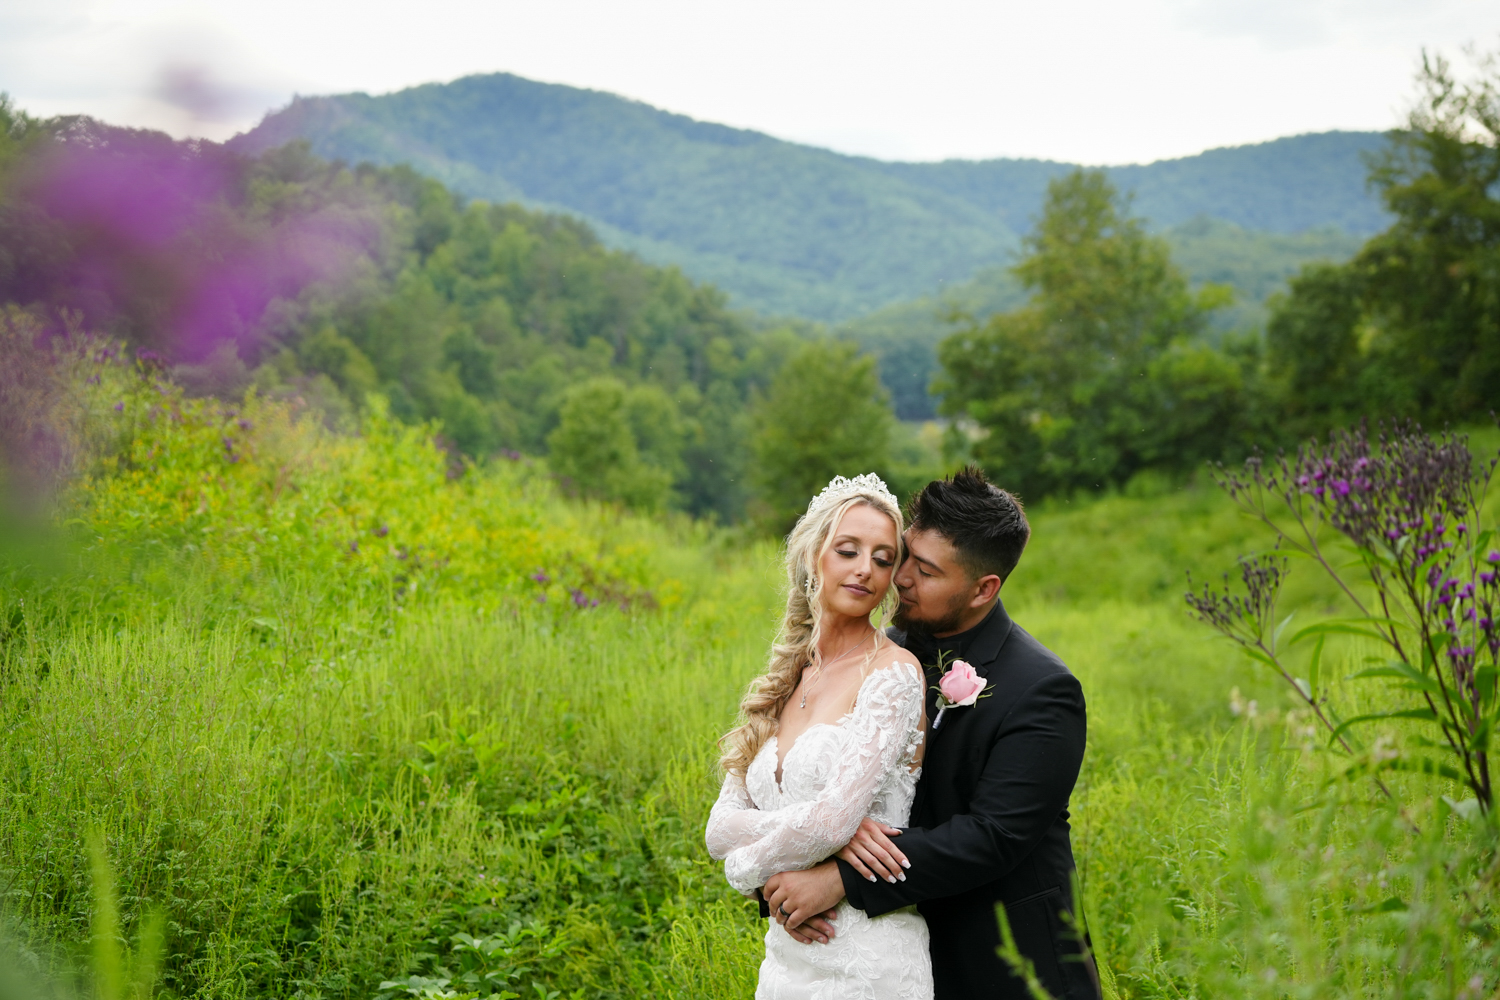 Groom holding his bride passionately in a meadow with a mountain view